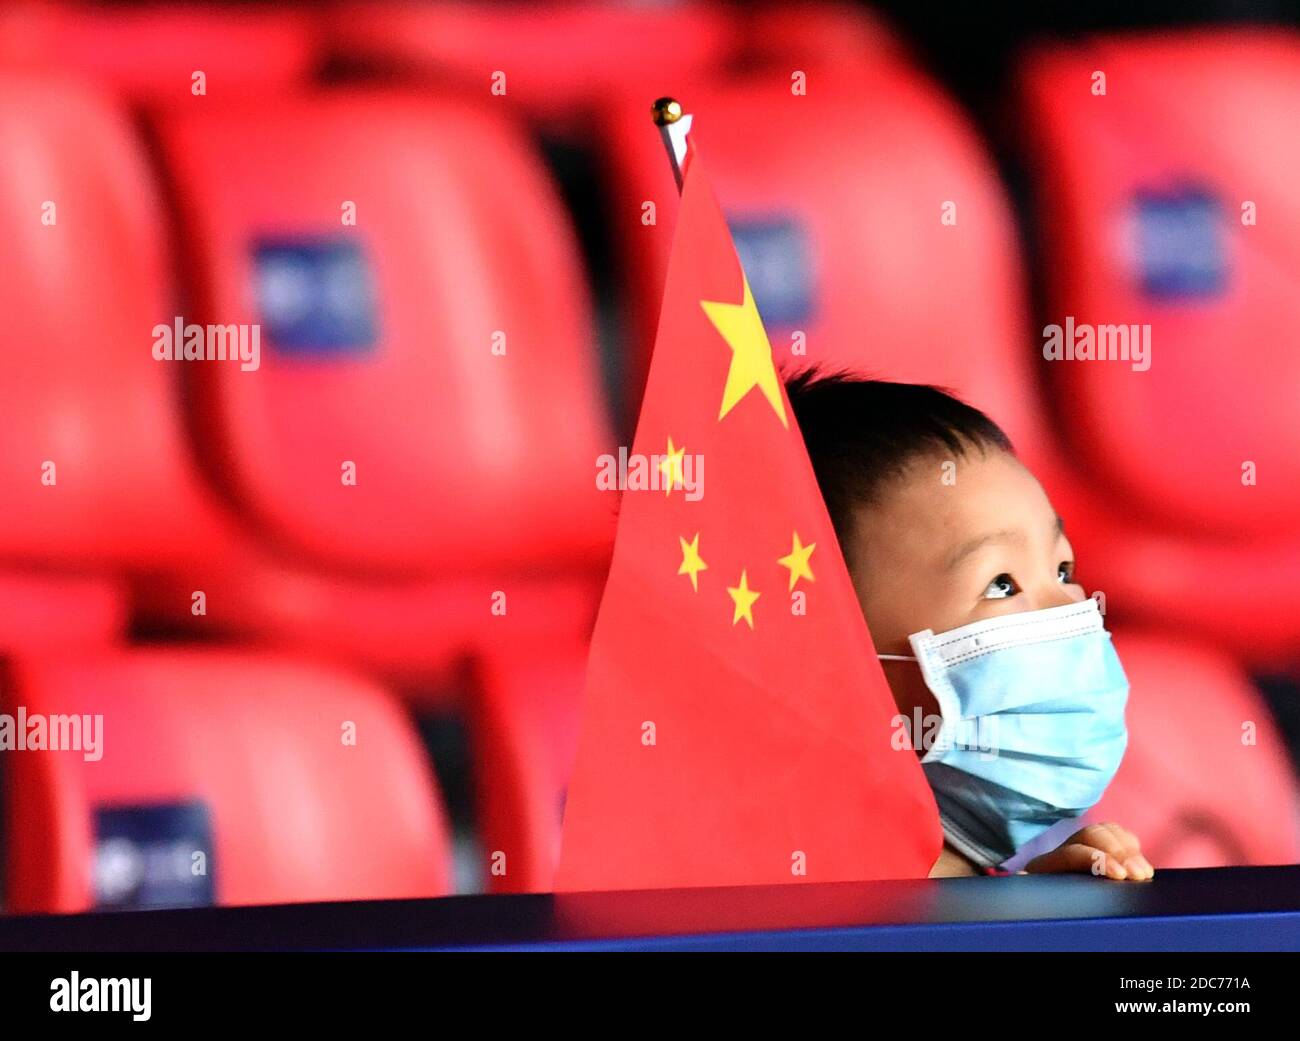 Zhengzhou, China's Henan Province. 19th Nov, 2020. A boy in the tribune looks on at 2020 ITTF finals in Zhengzhou, capital of central China's Henan Province, Nov. 19, 2020. Since the COVID-19 pandemic outbreak, the 2020 ITTF Finals is the first international tournament staged in China with fans in attendance. Credit: Li Jianan/Xinhua/Alamy Live News Stock Photo